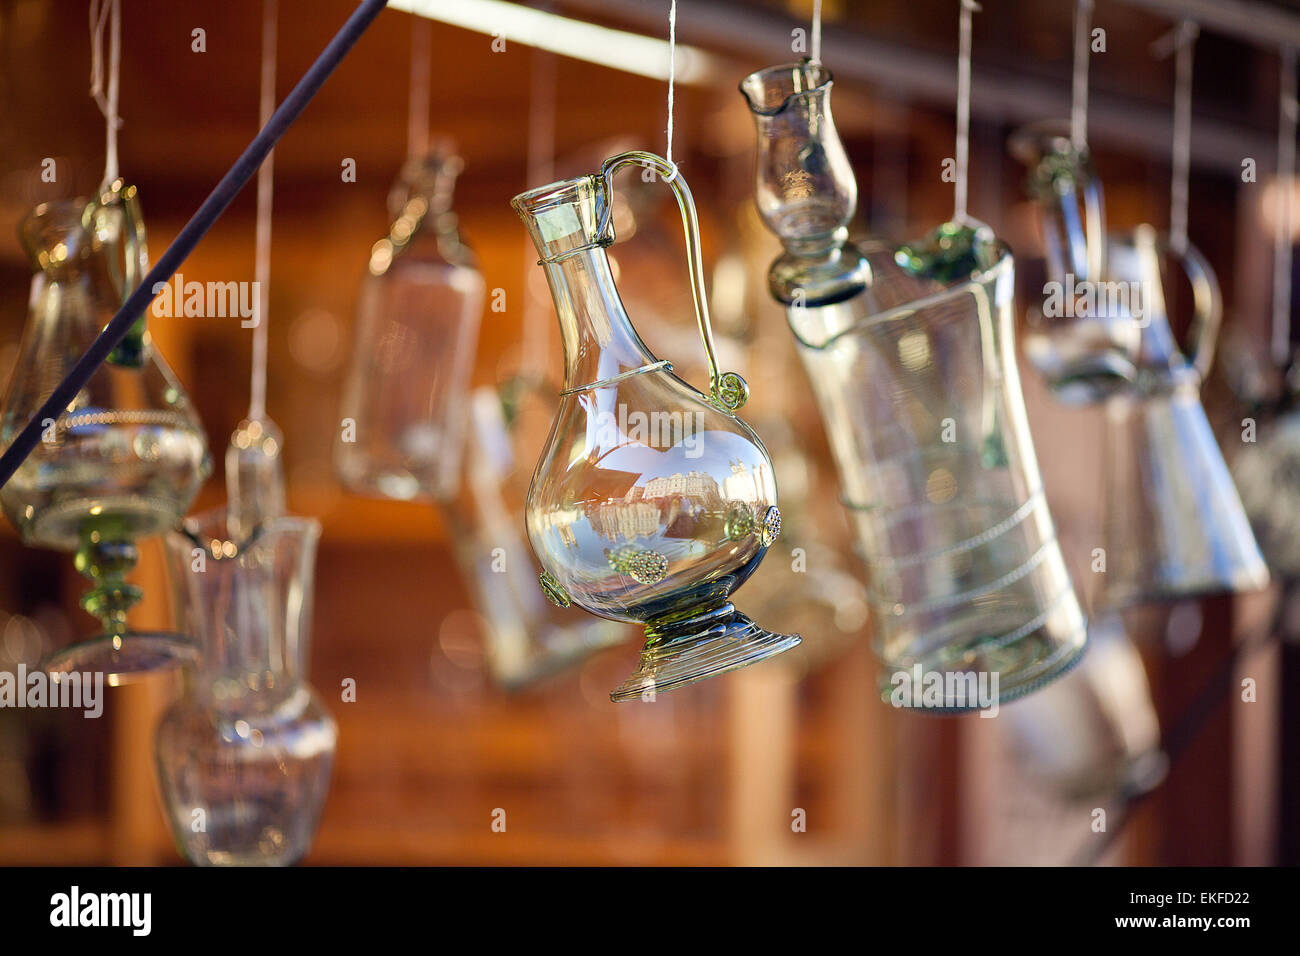 decanters of bohemian glass hanging on hooks Stock Photo